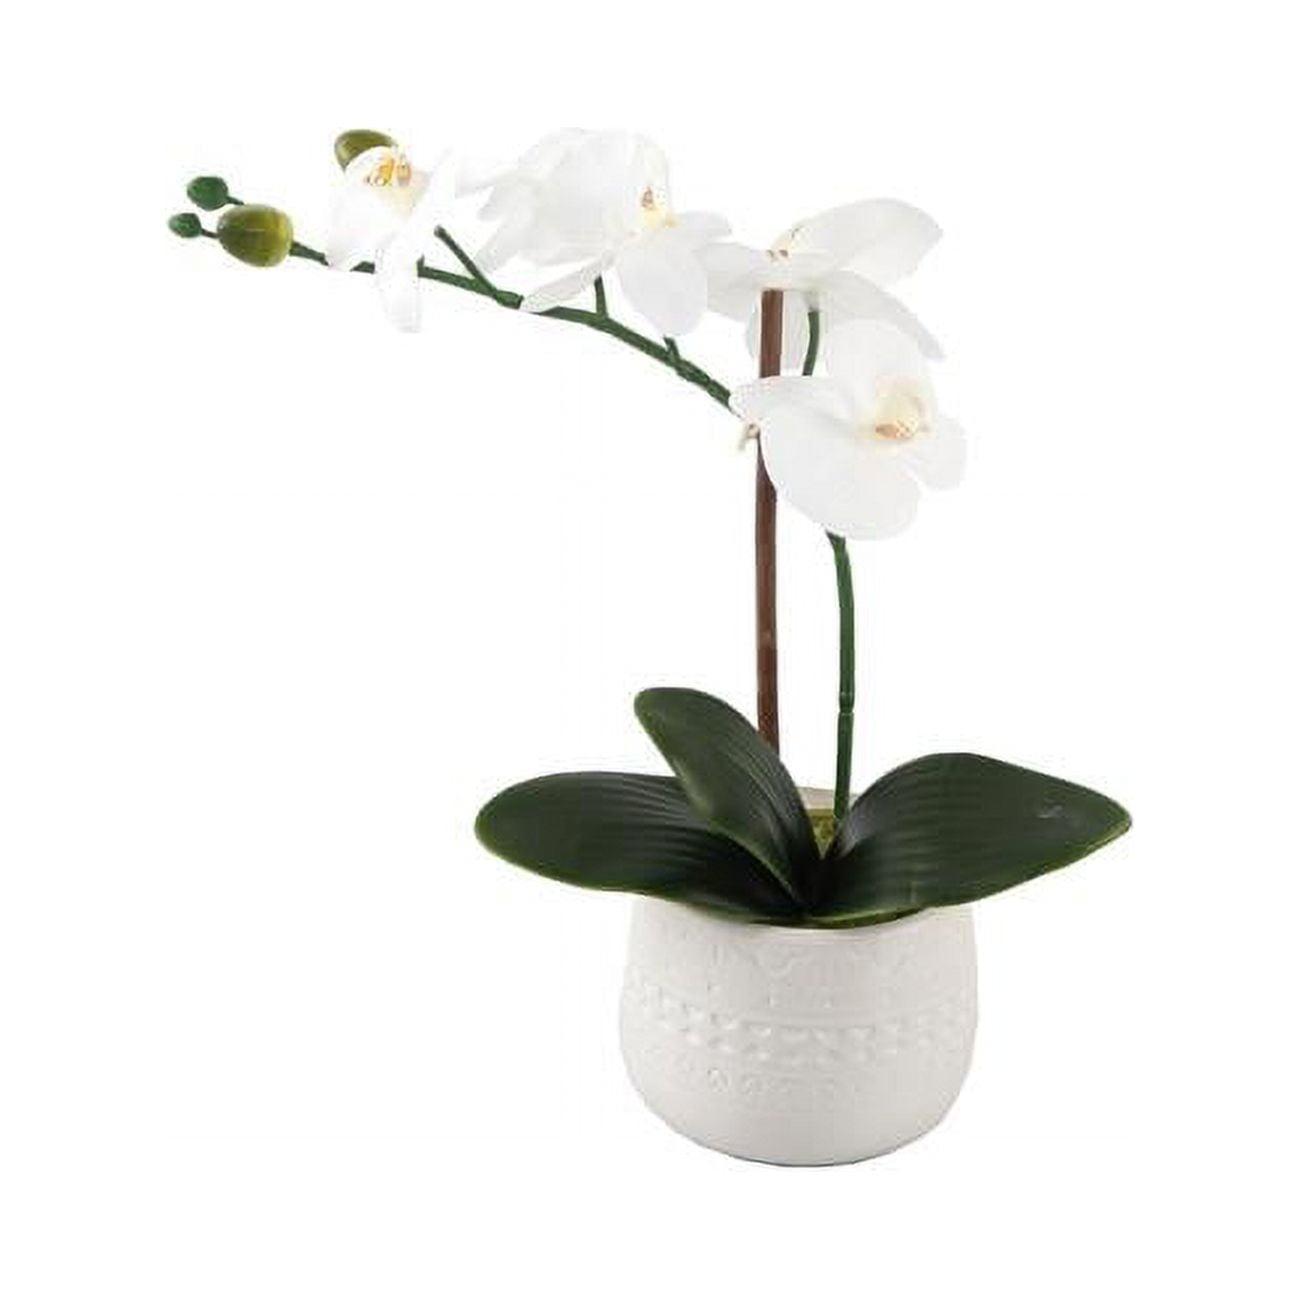 Chic 13" White Orchid & Rose Silk Floral Arrangement in Mayan Planter